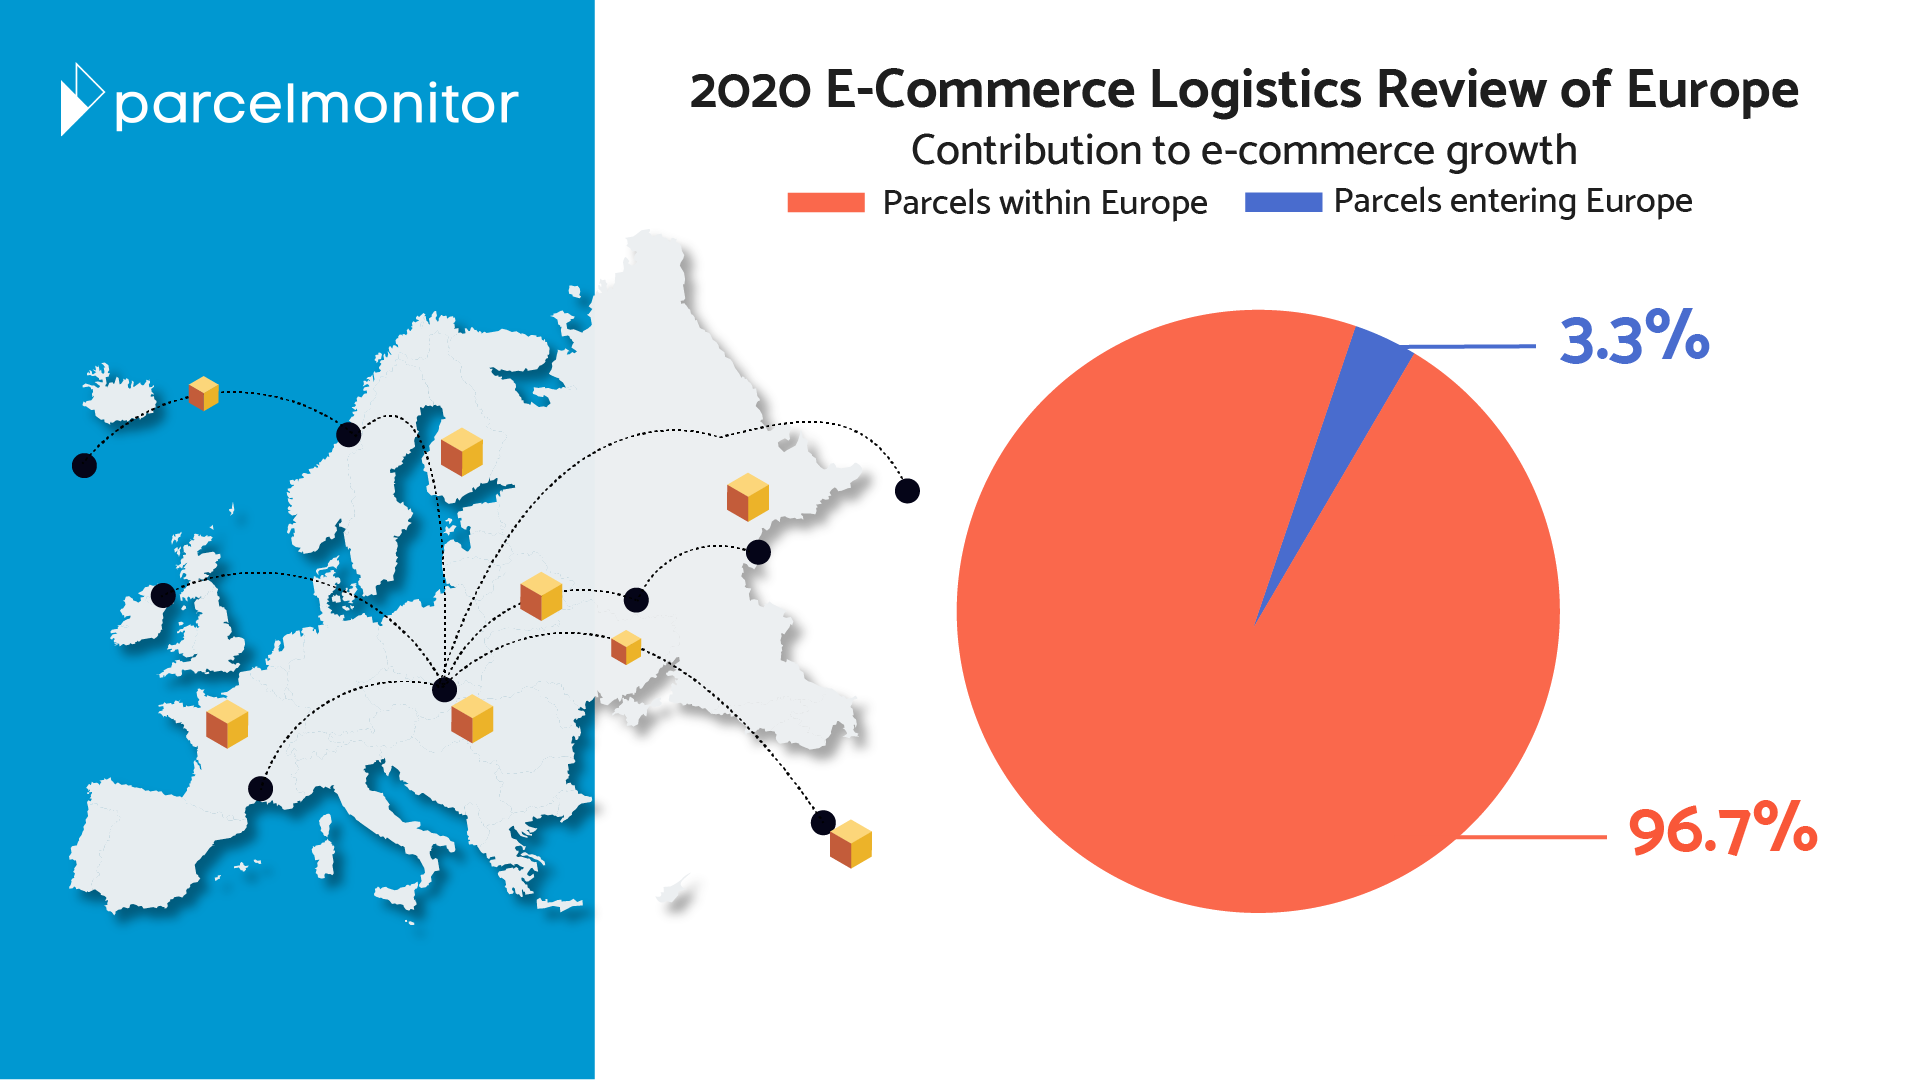 Europe 2020 Highlights E-Commerce Contribution